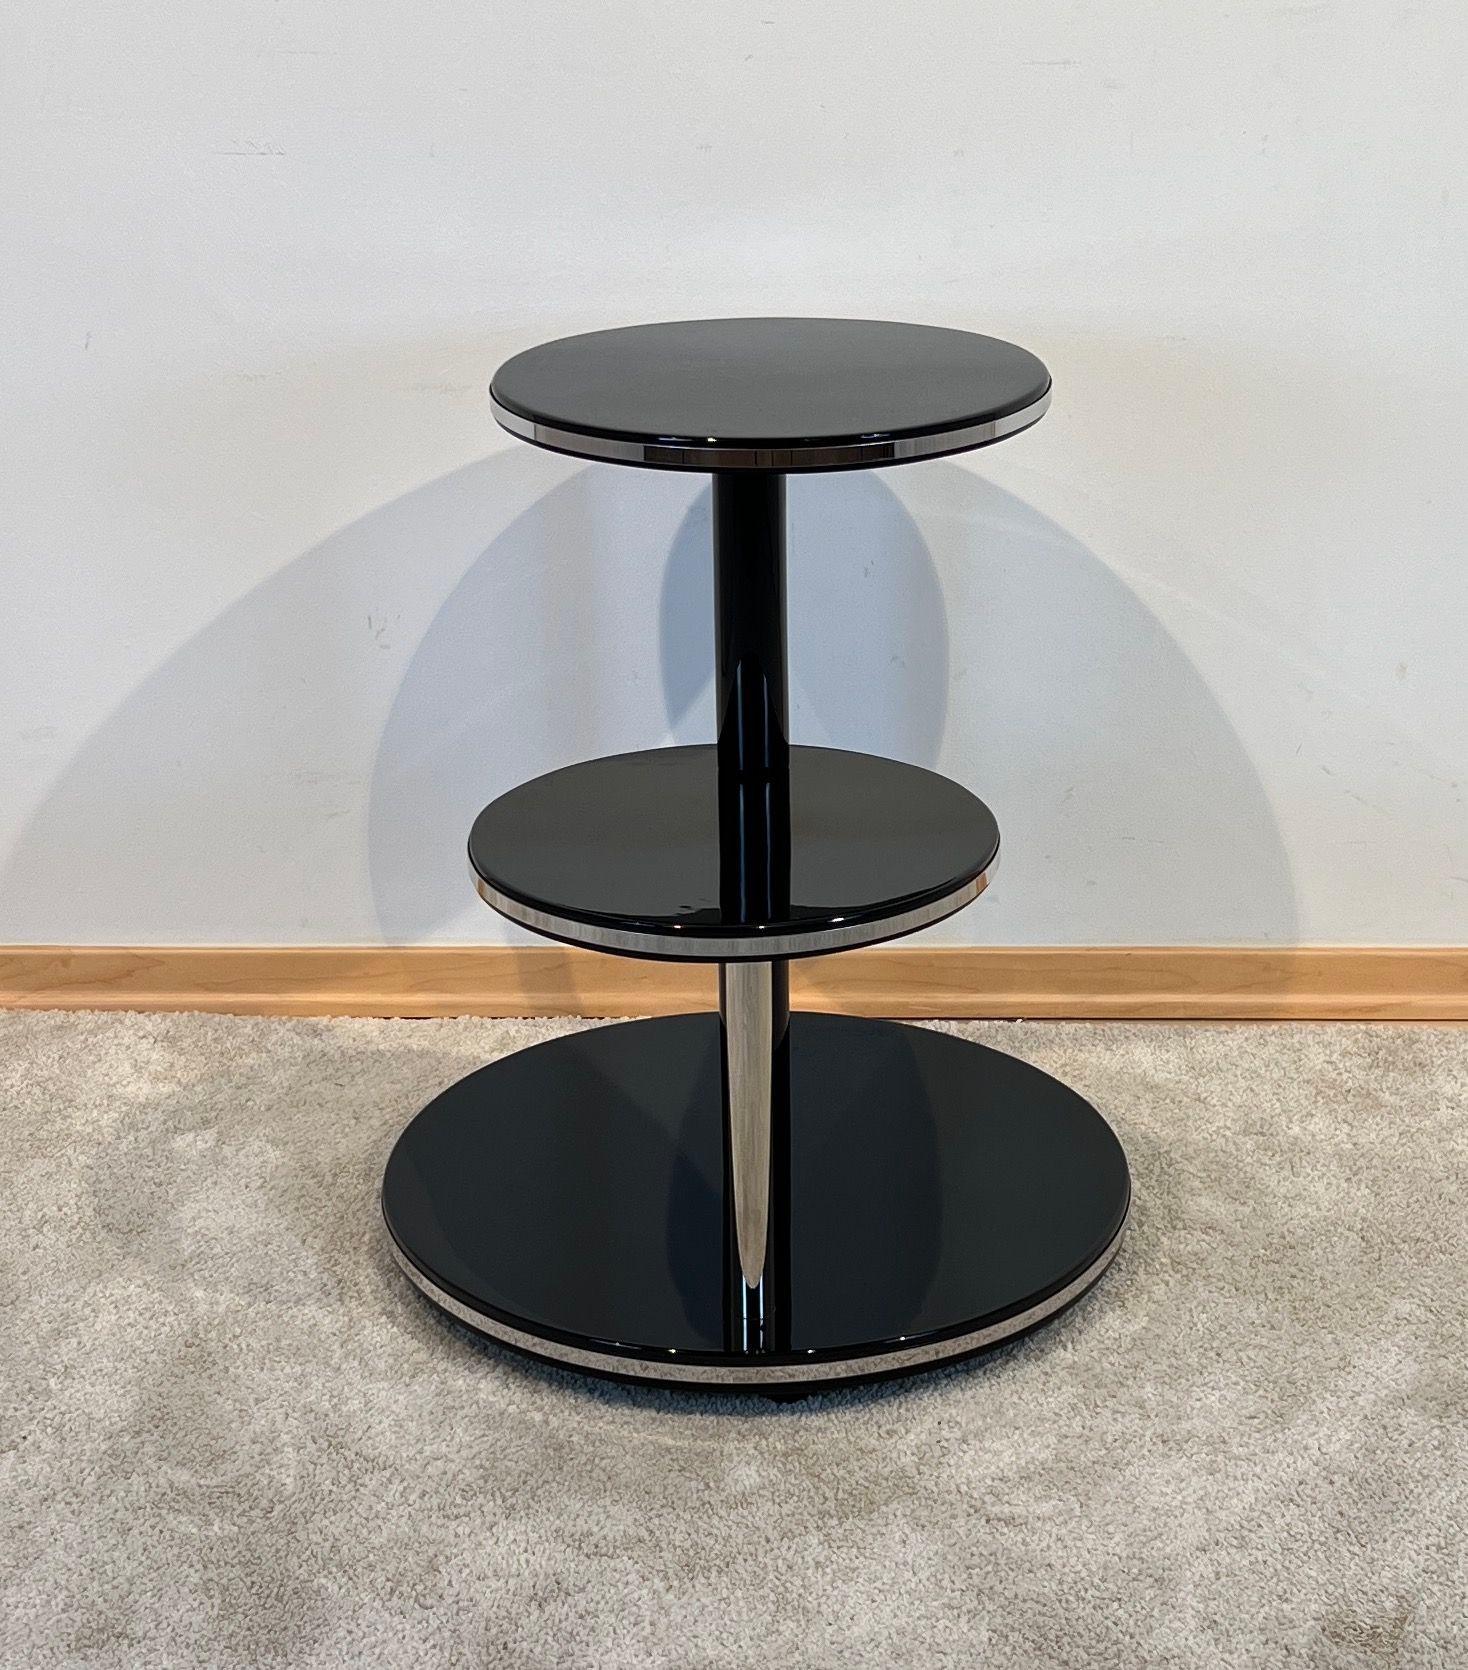 Art Deco Round Side Table, Black Lacquer, Chrome, Metal Trims, France circa 1930 For Sale 1